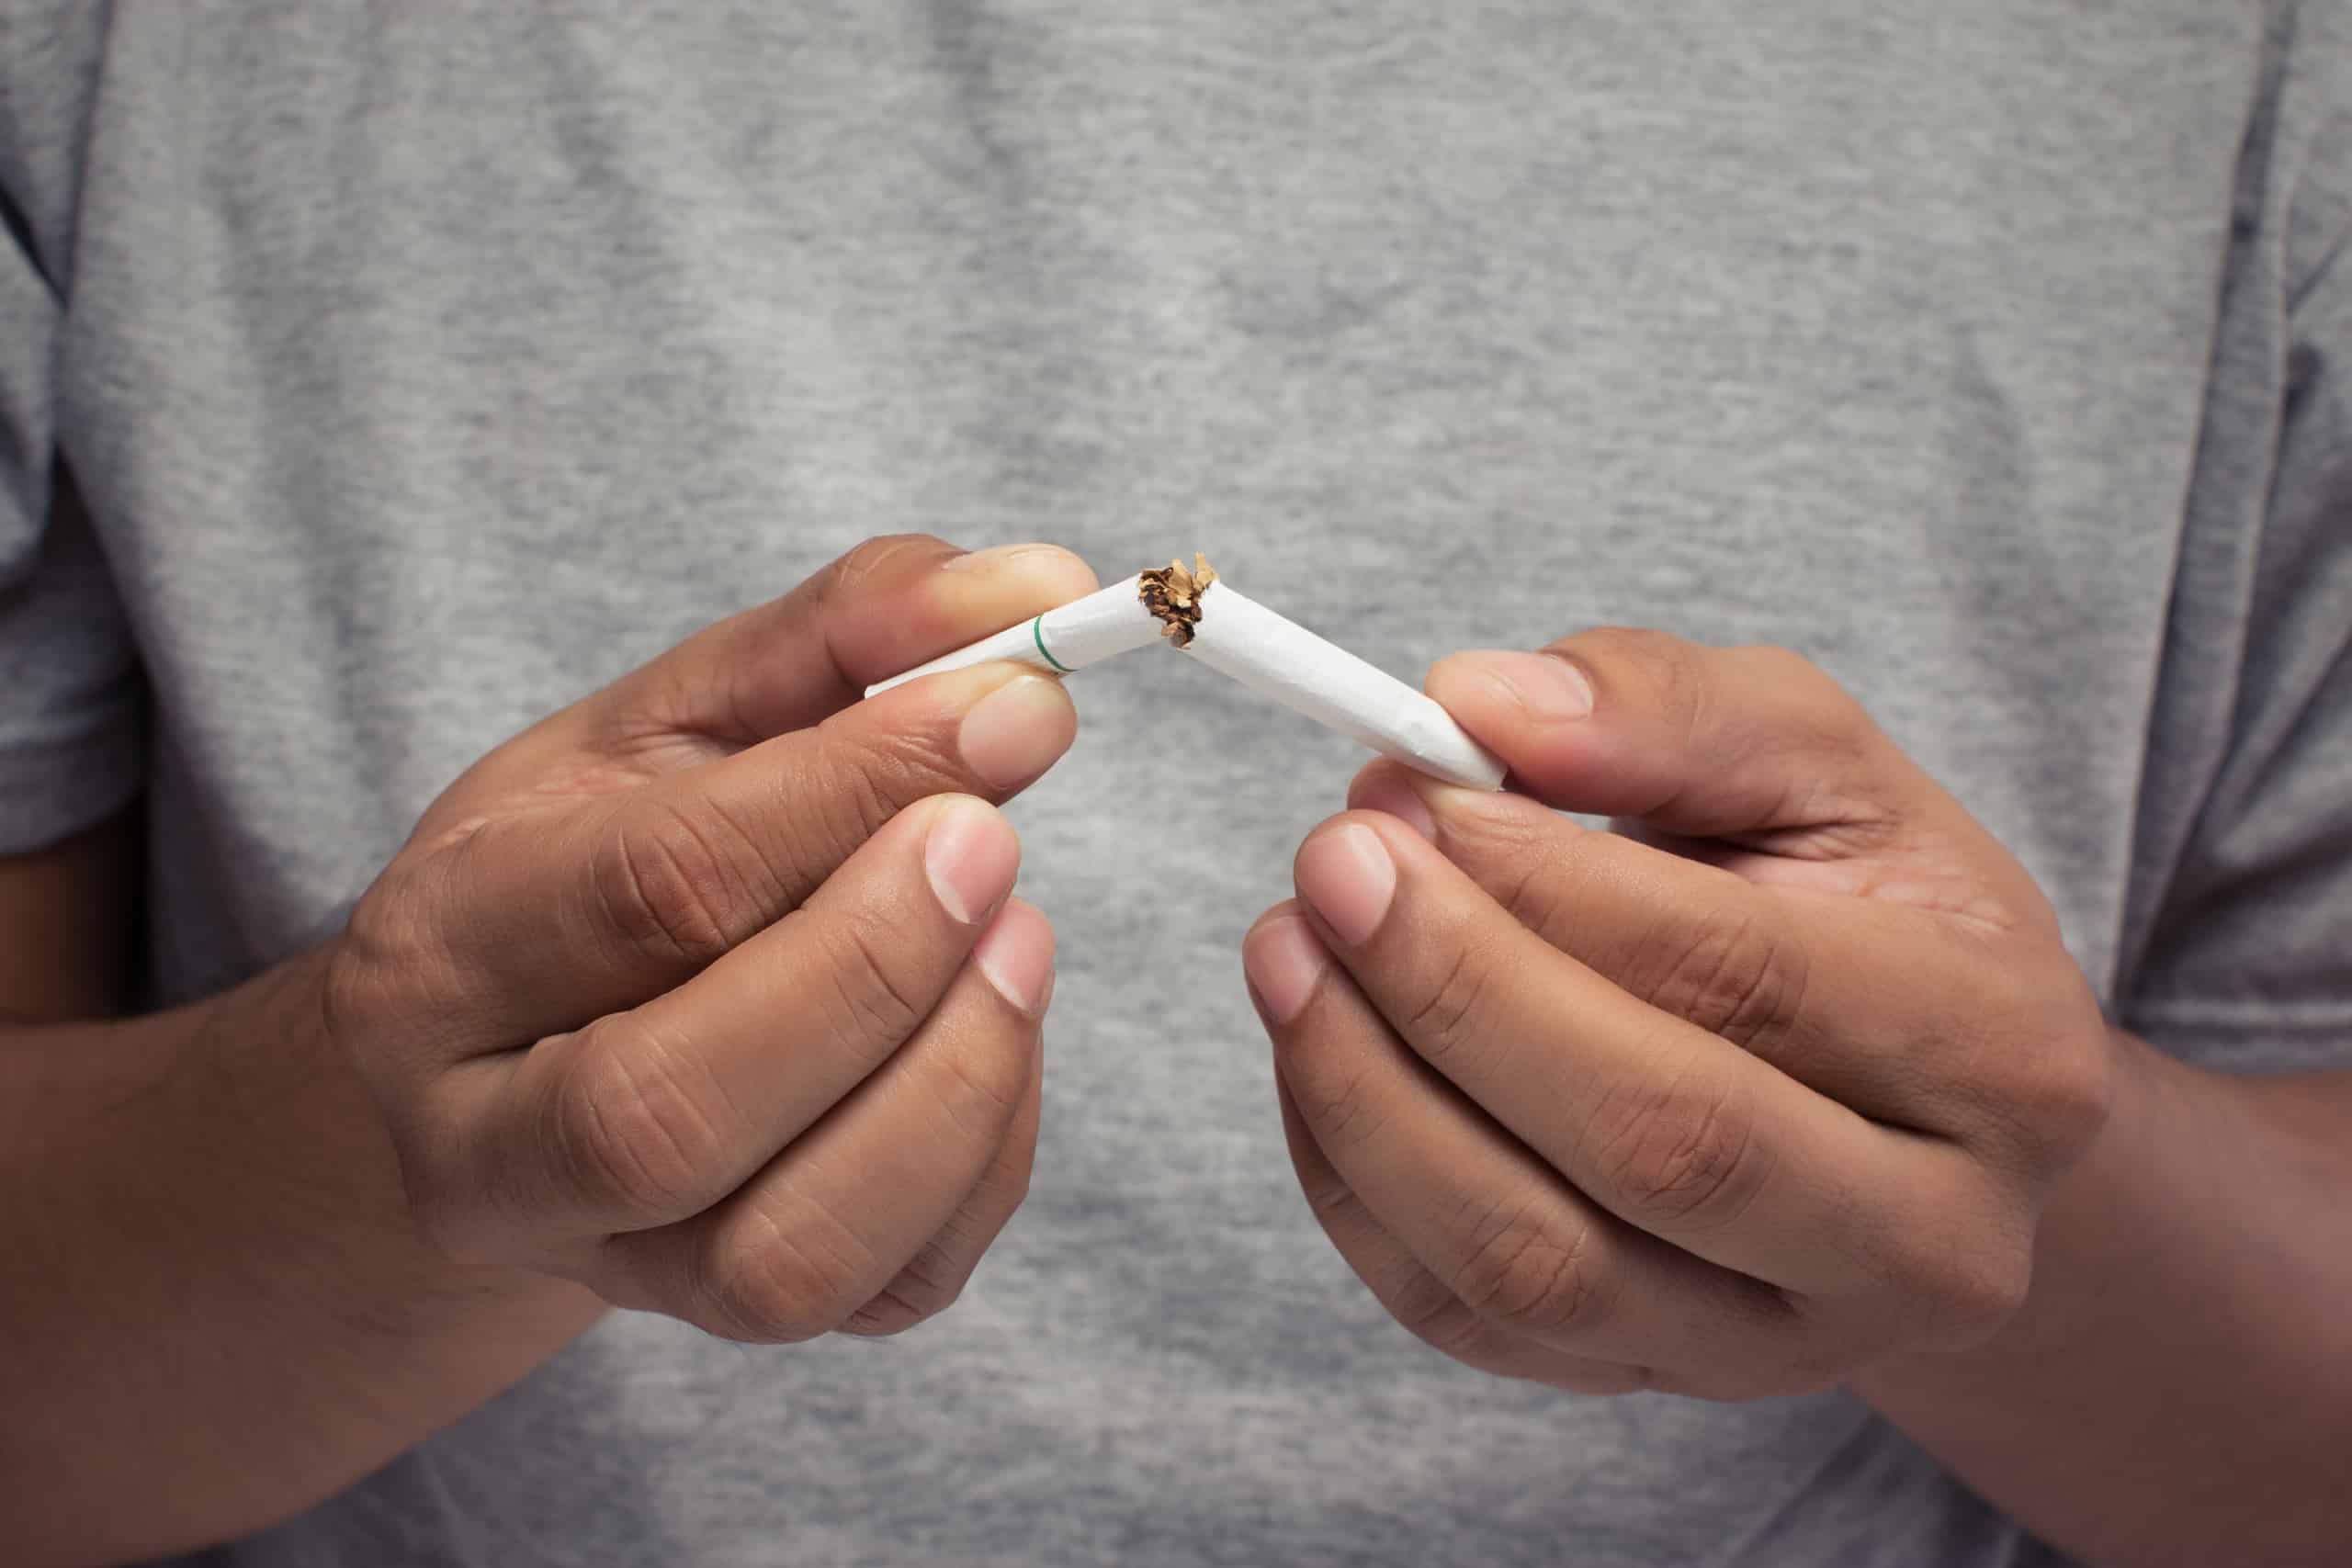 How Nicotine Patches Can Aid in Quitting Smoking and Reducing Back Pain